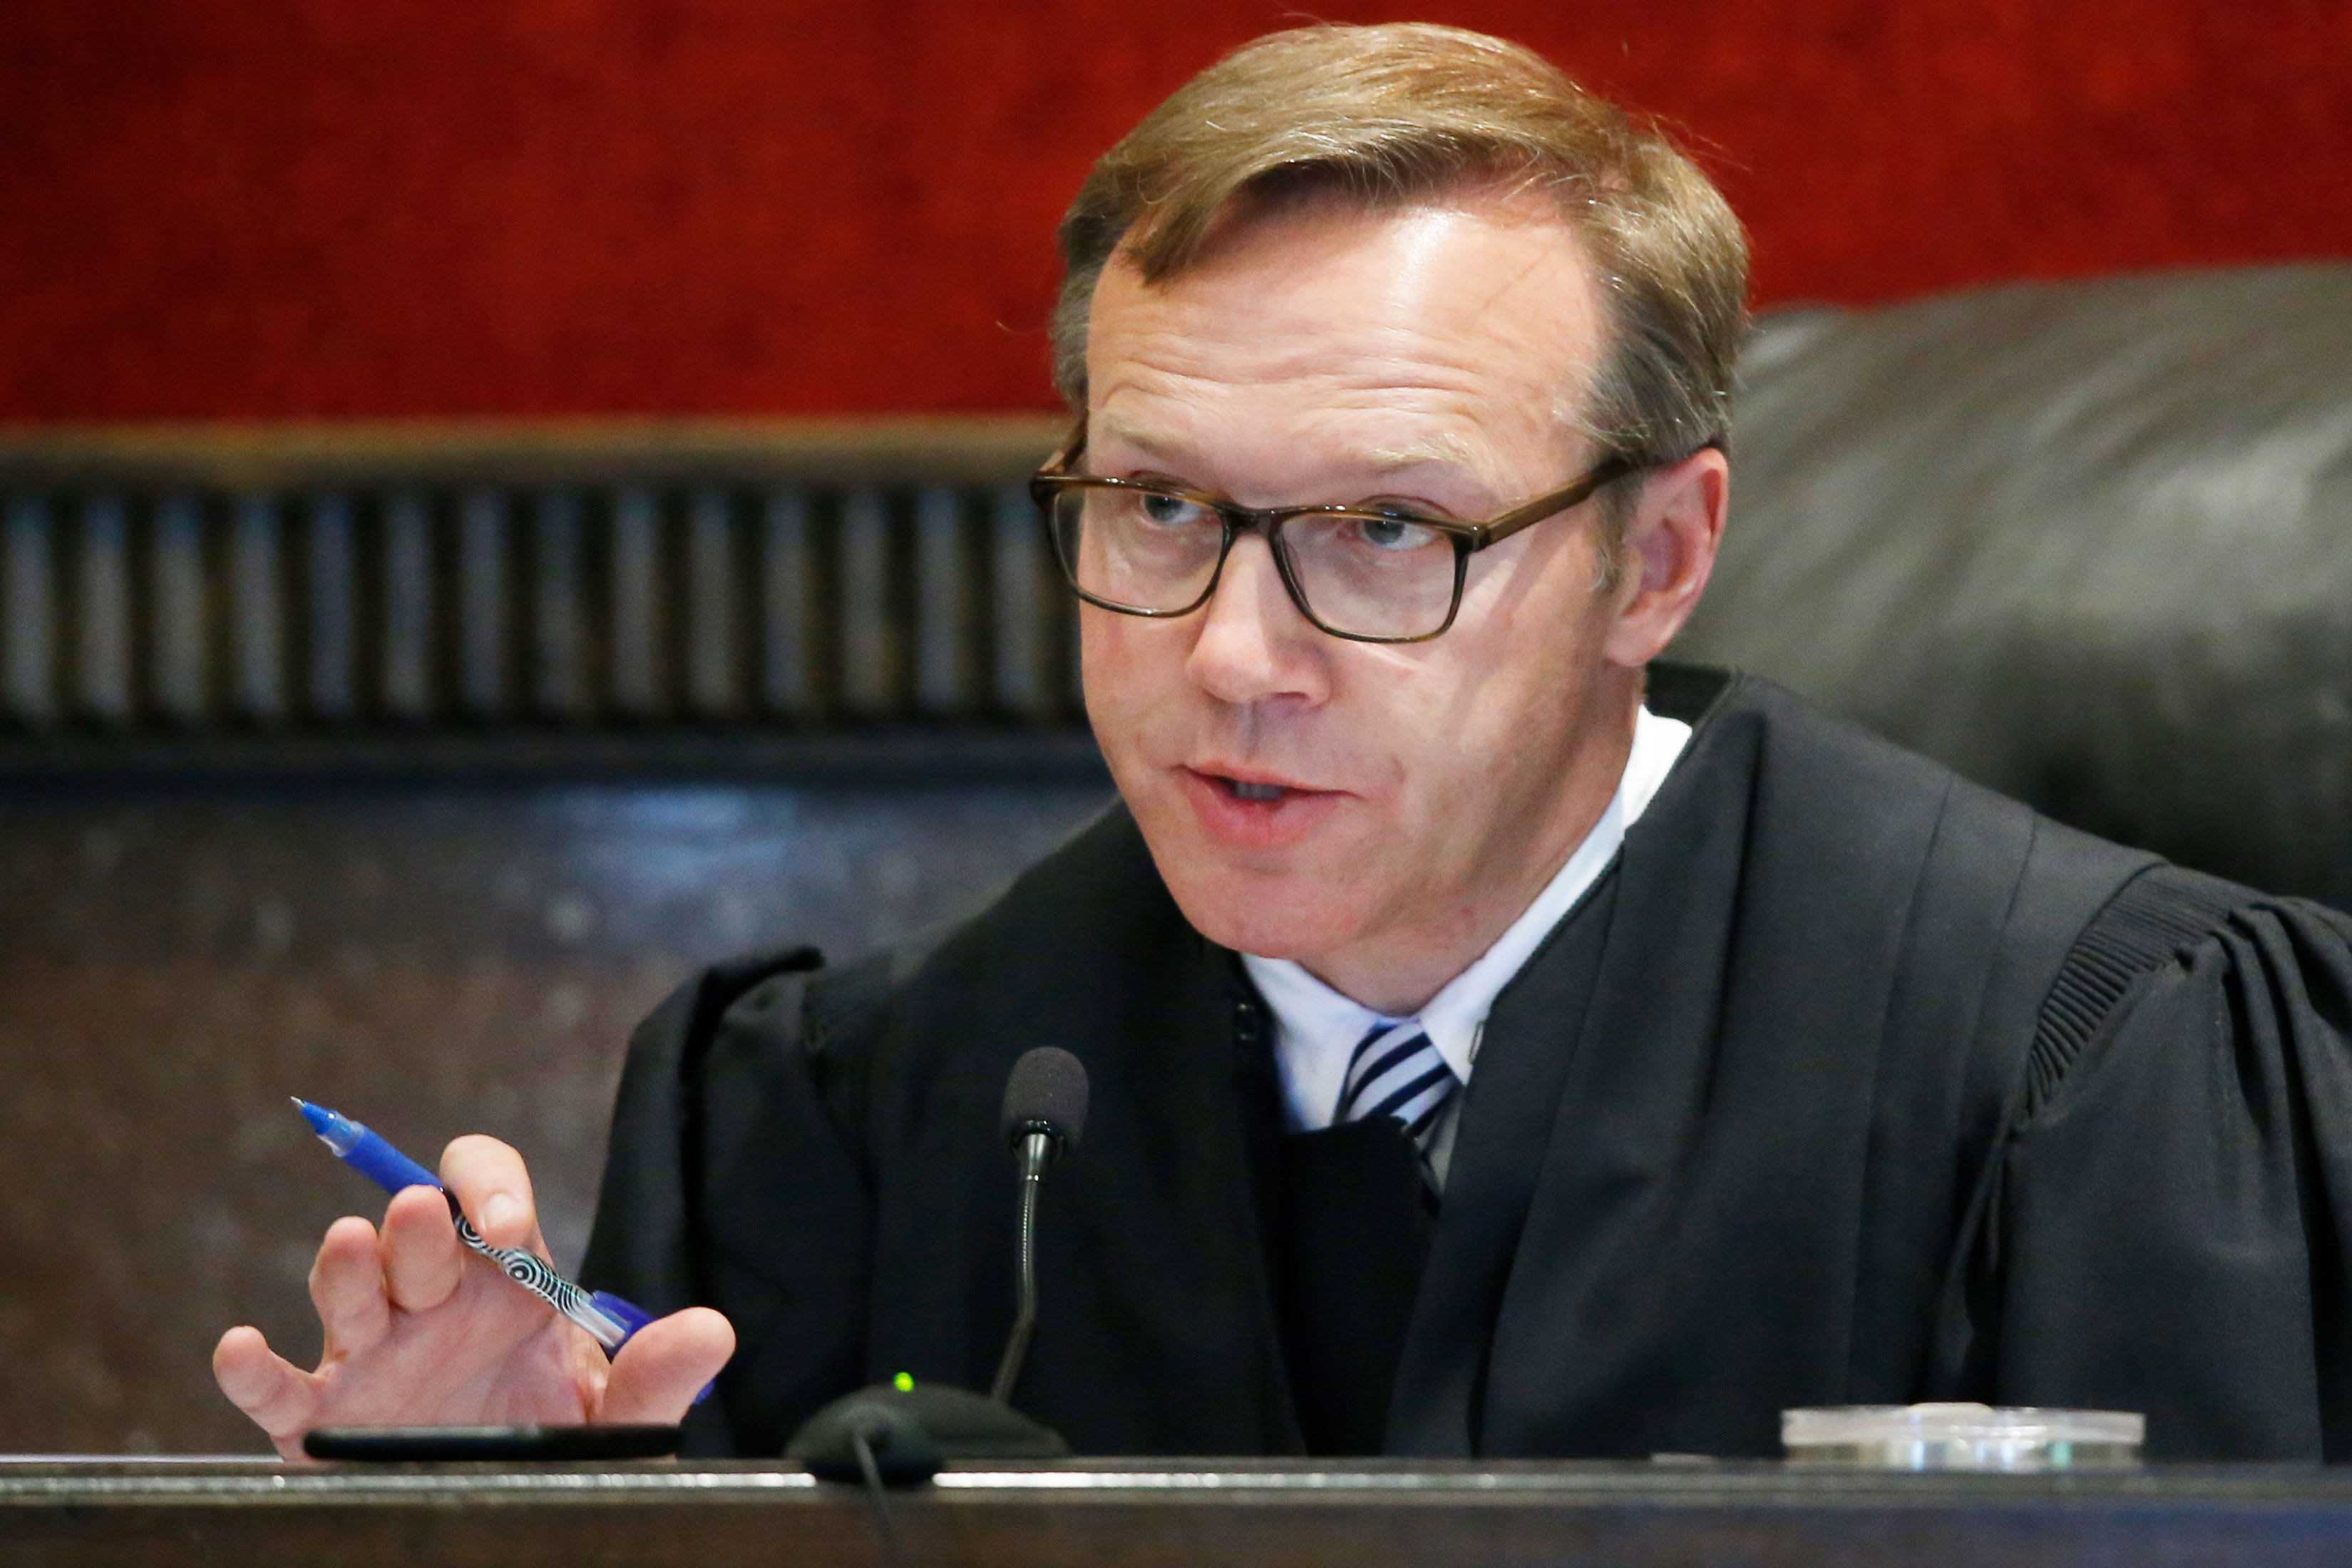 Oklahoma uses property law to win J&J opioid suit — others could too